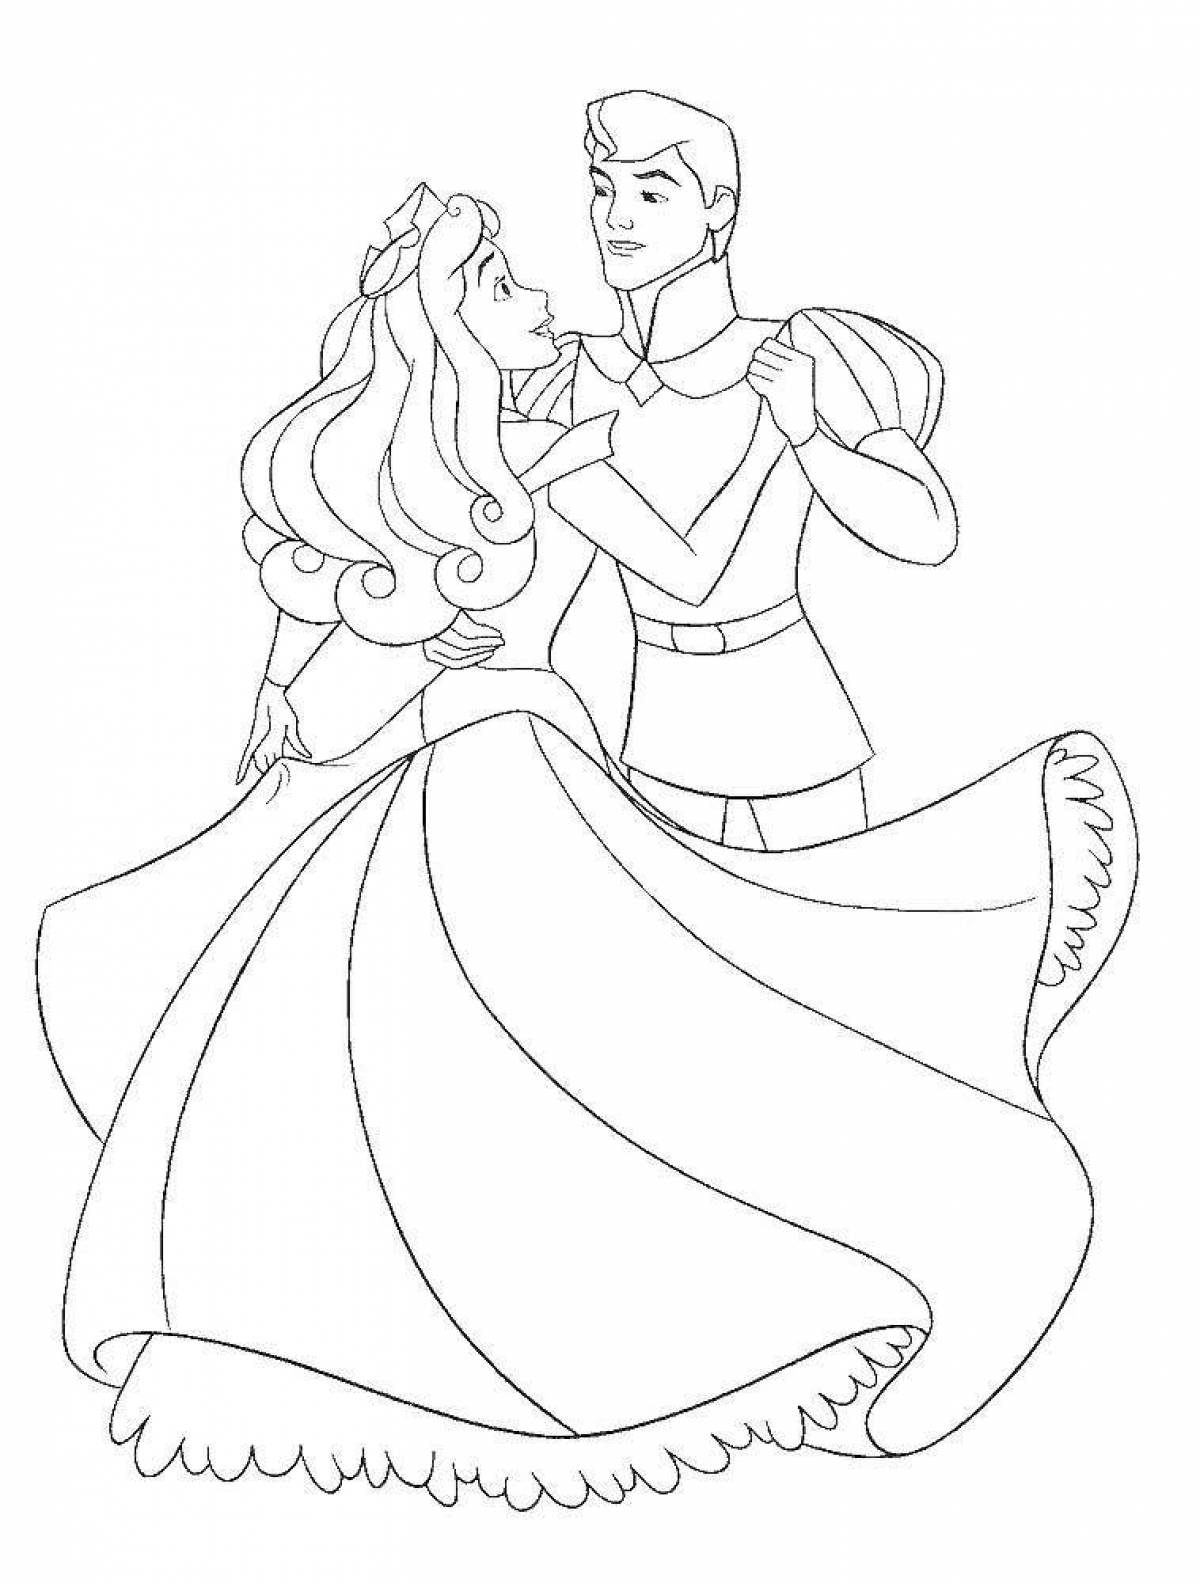 Exquisite prince and princess coloring pages